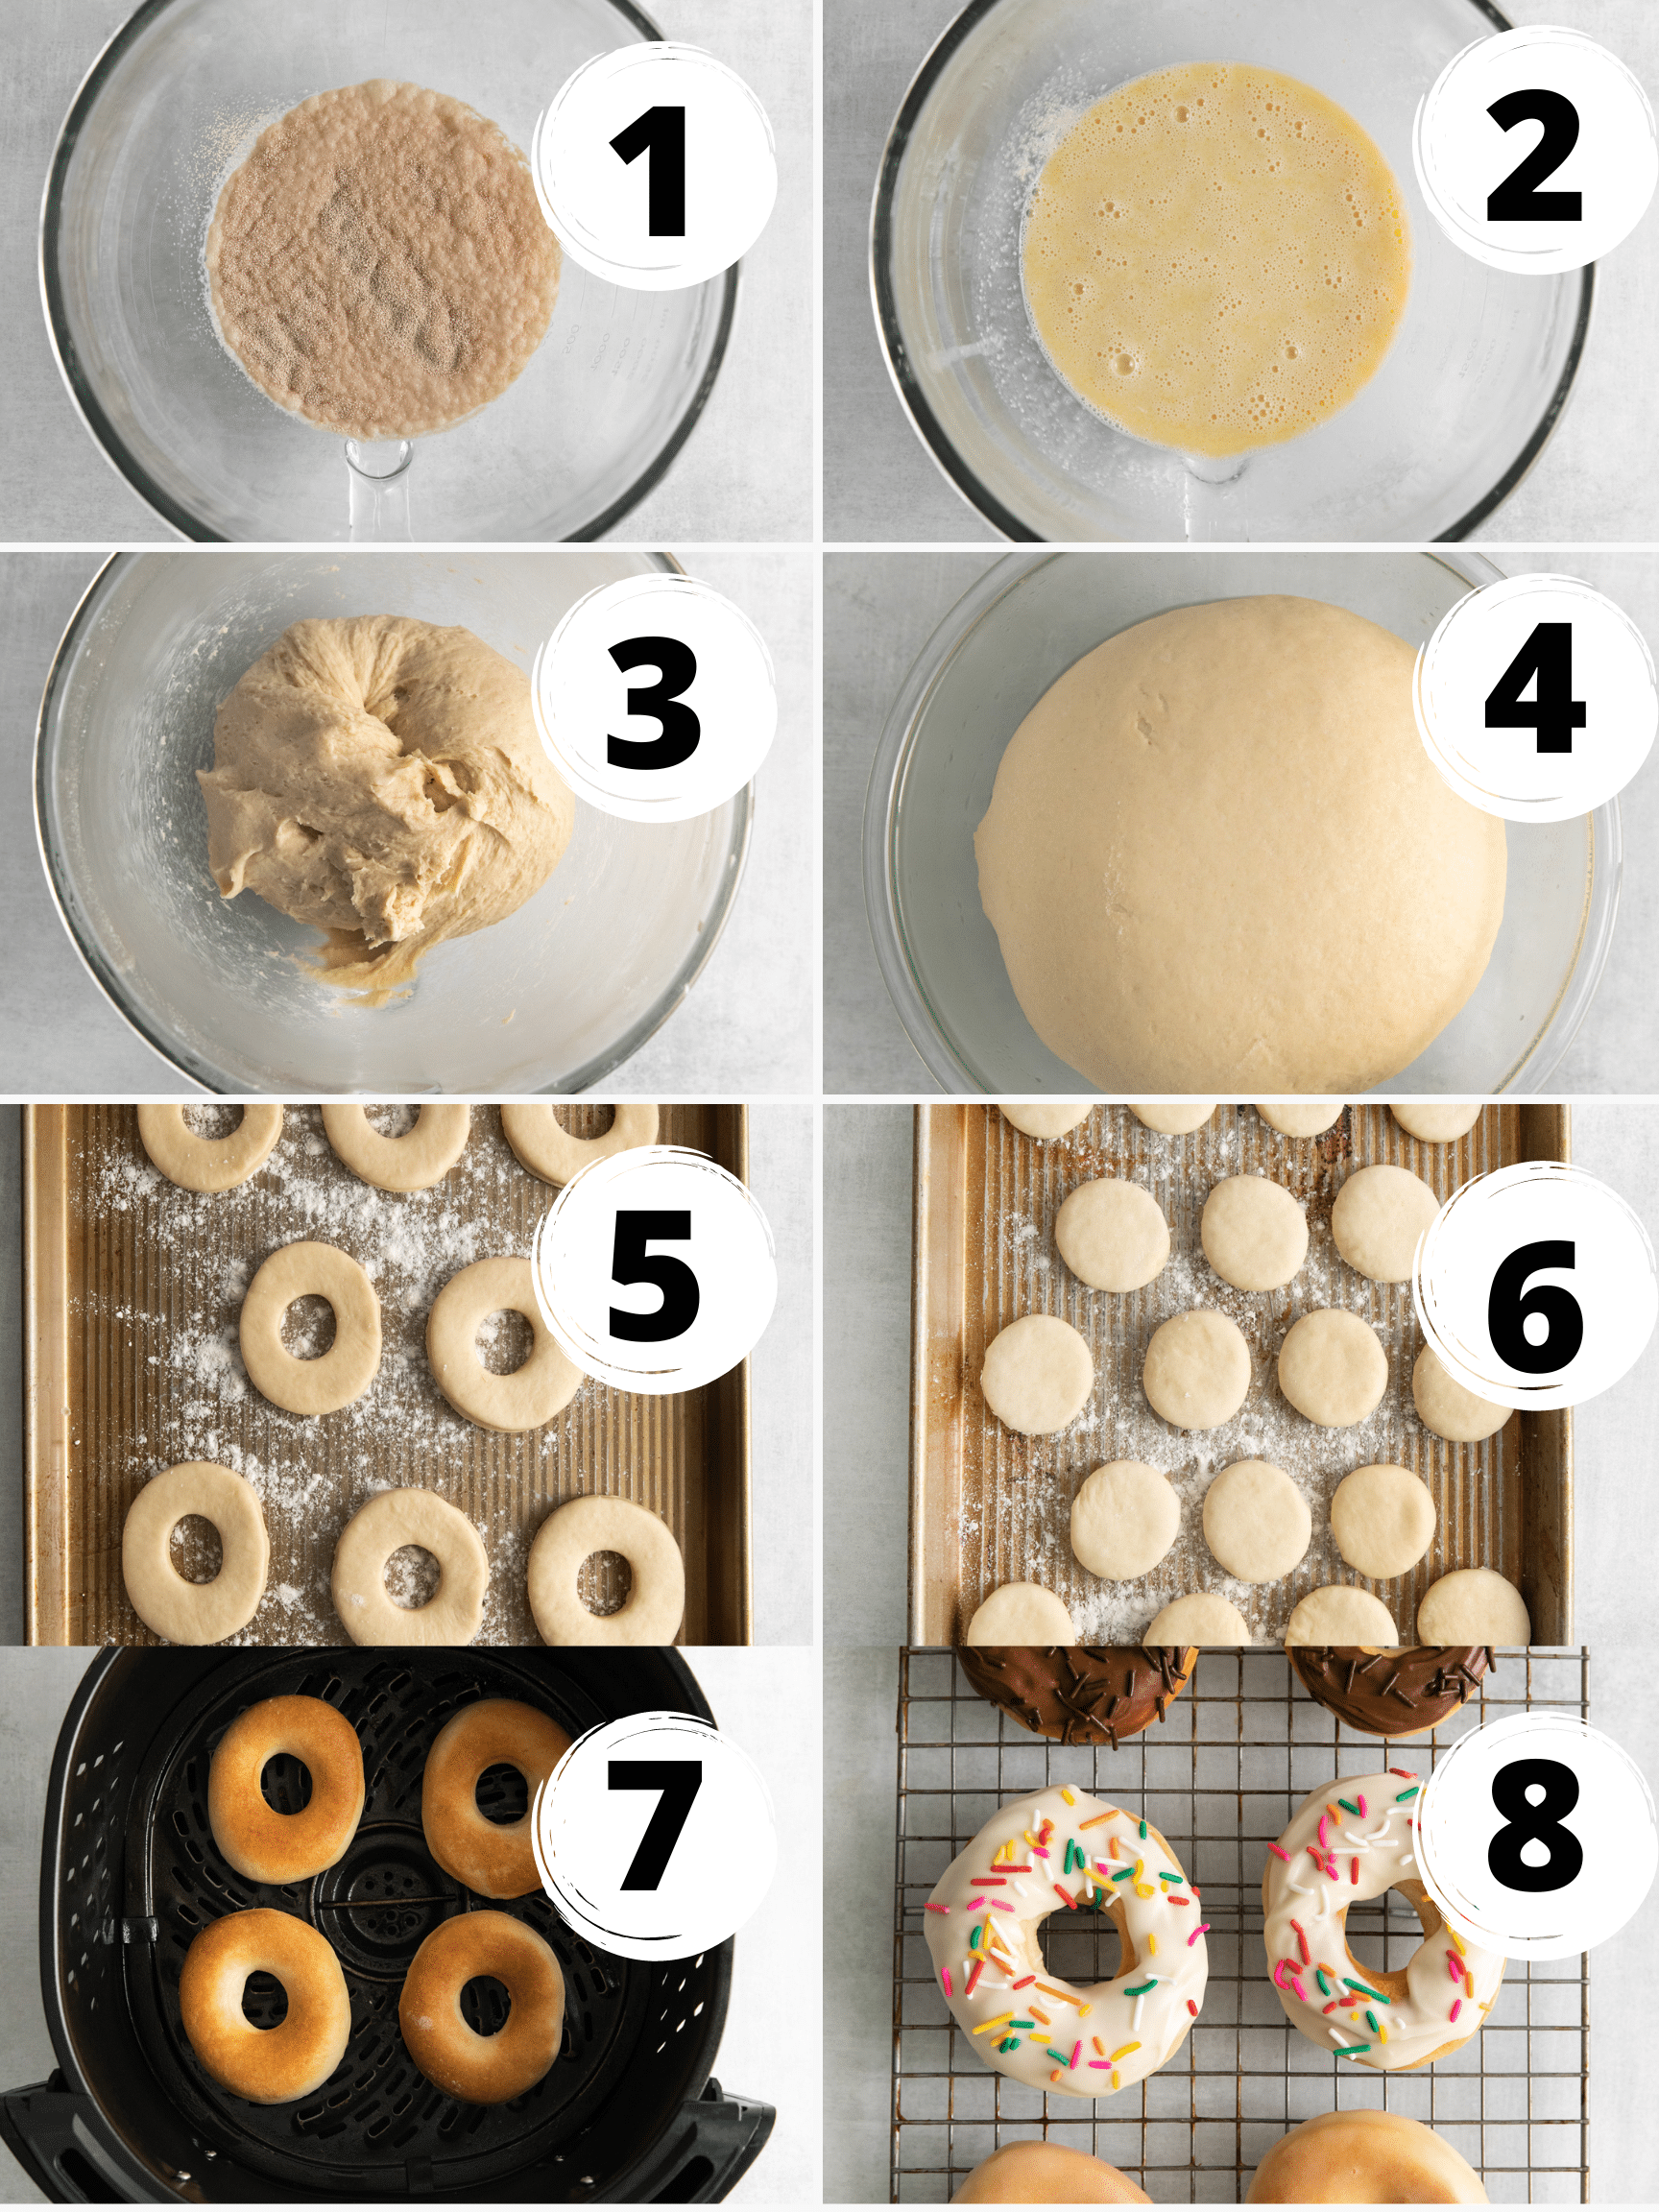 Collage of photos showing the steps to make air fryer doughnuts